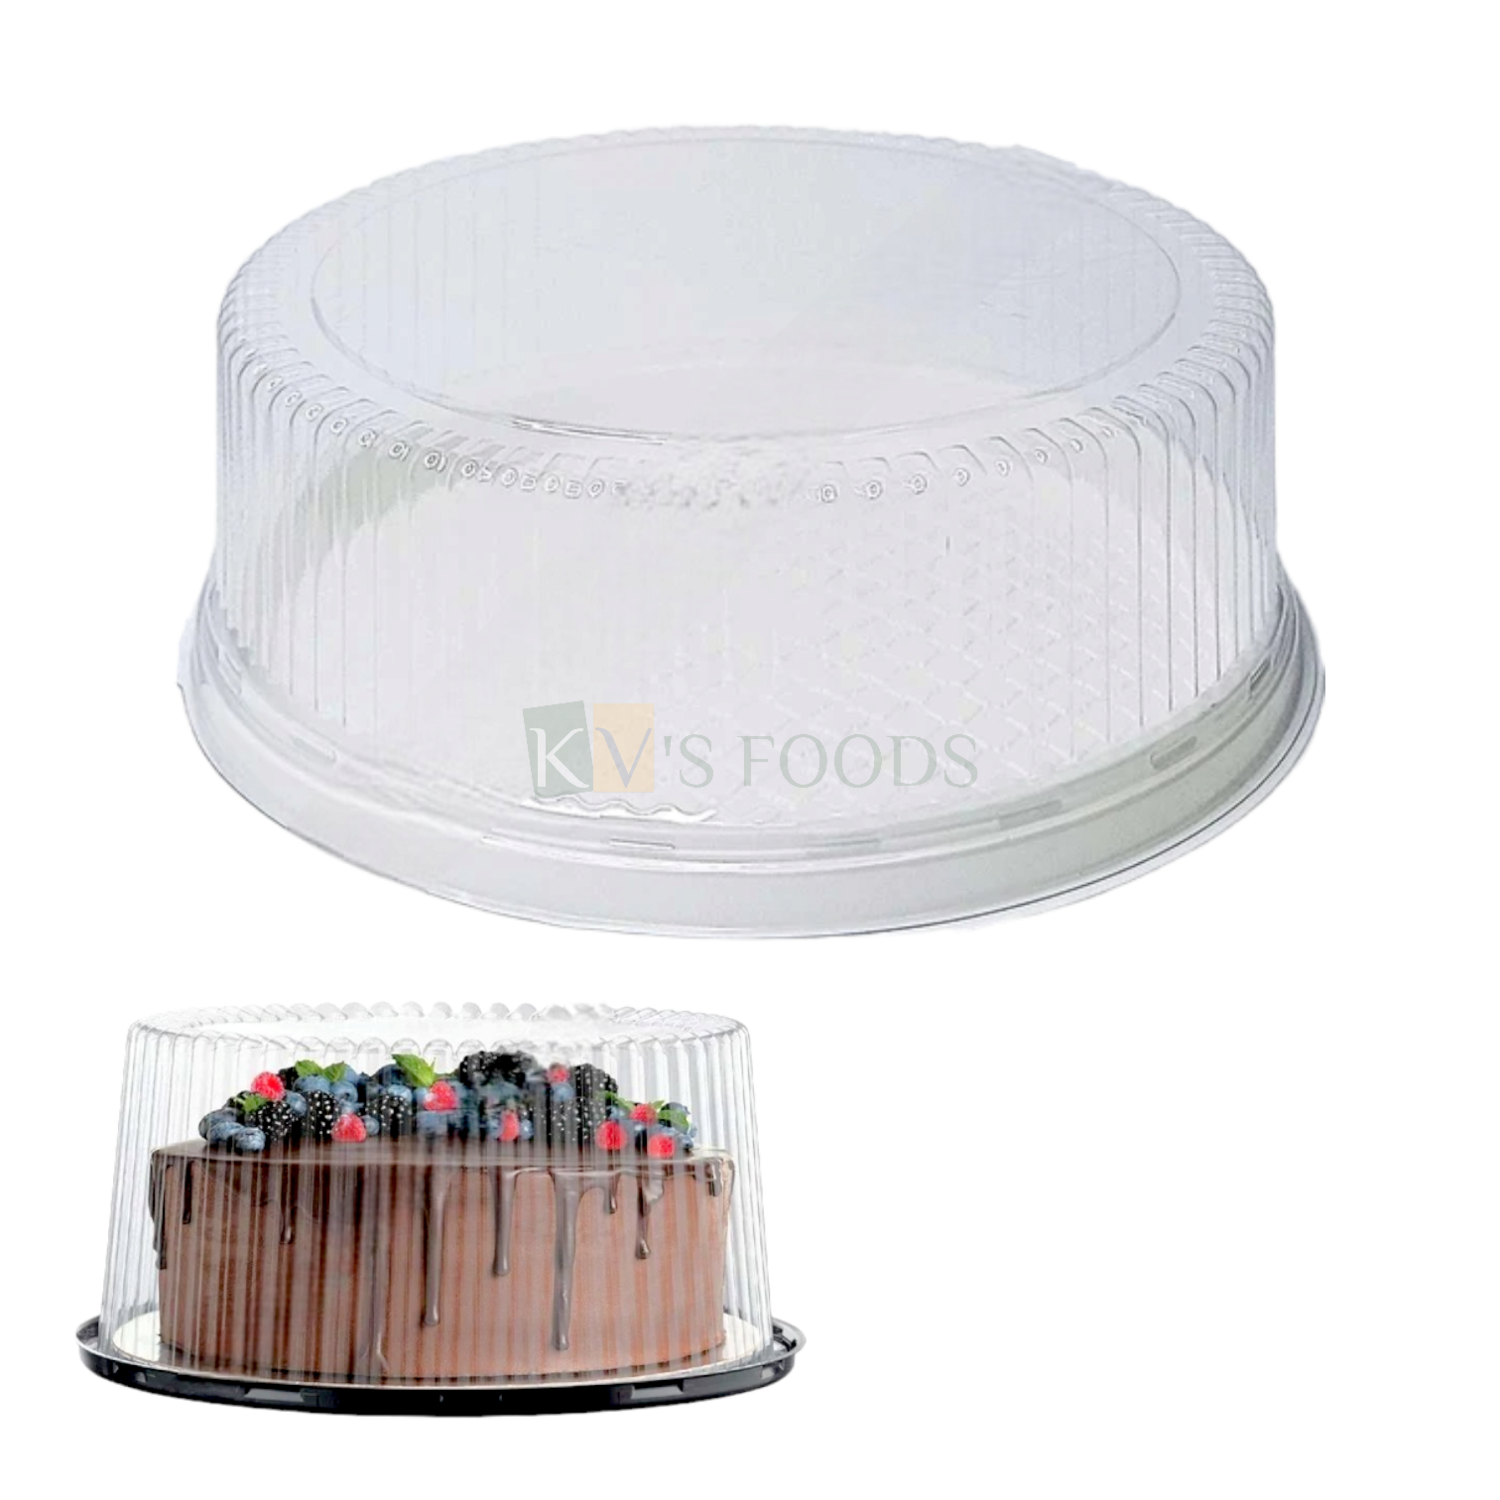 1PC Height 4 Inches Capacity ~1/2 Kg (8 Inch) Base Cake Container with Lid, 2 in 1 Transparent Plastic Circle Cake Carriers Holder Reusable Box, Can be used for Storing Cookies, Bakery Accessories